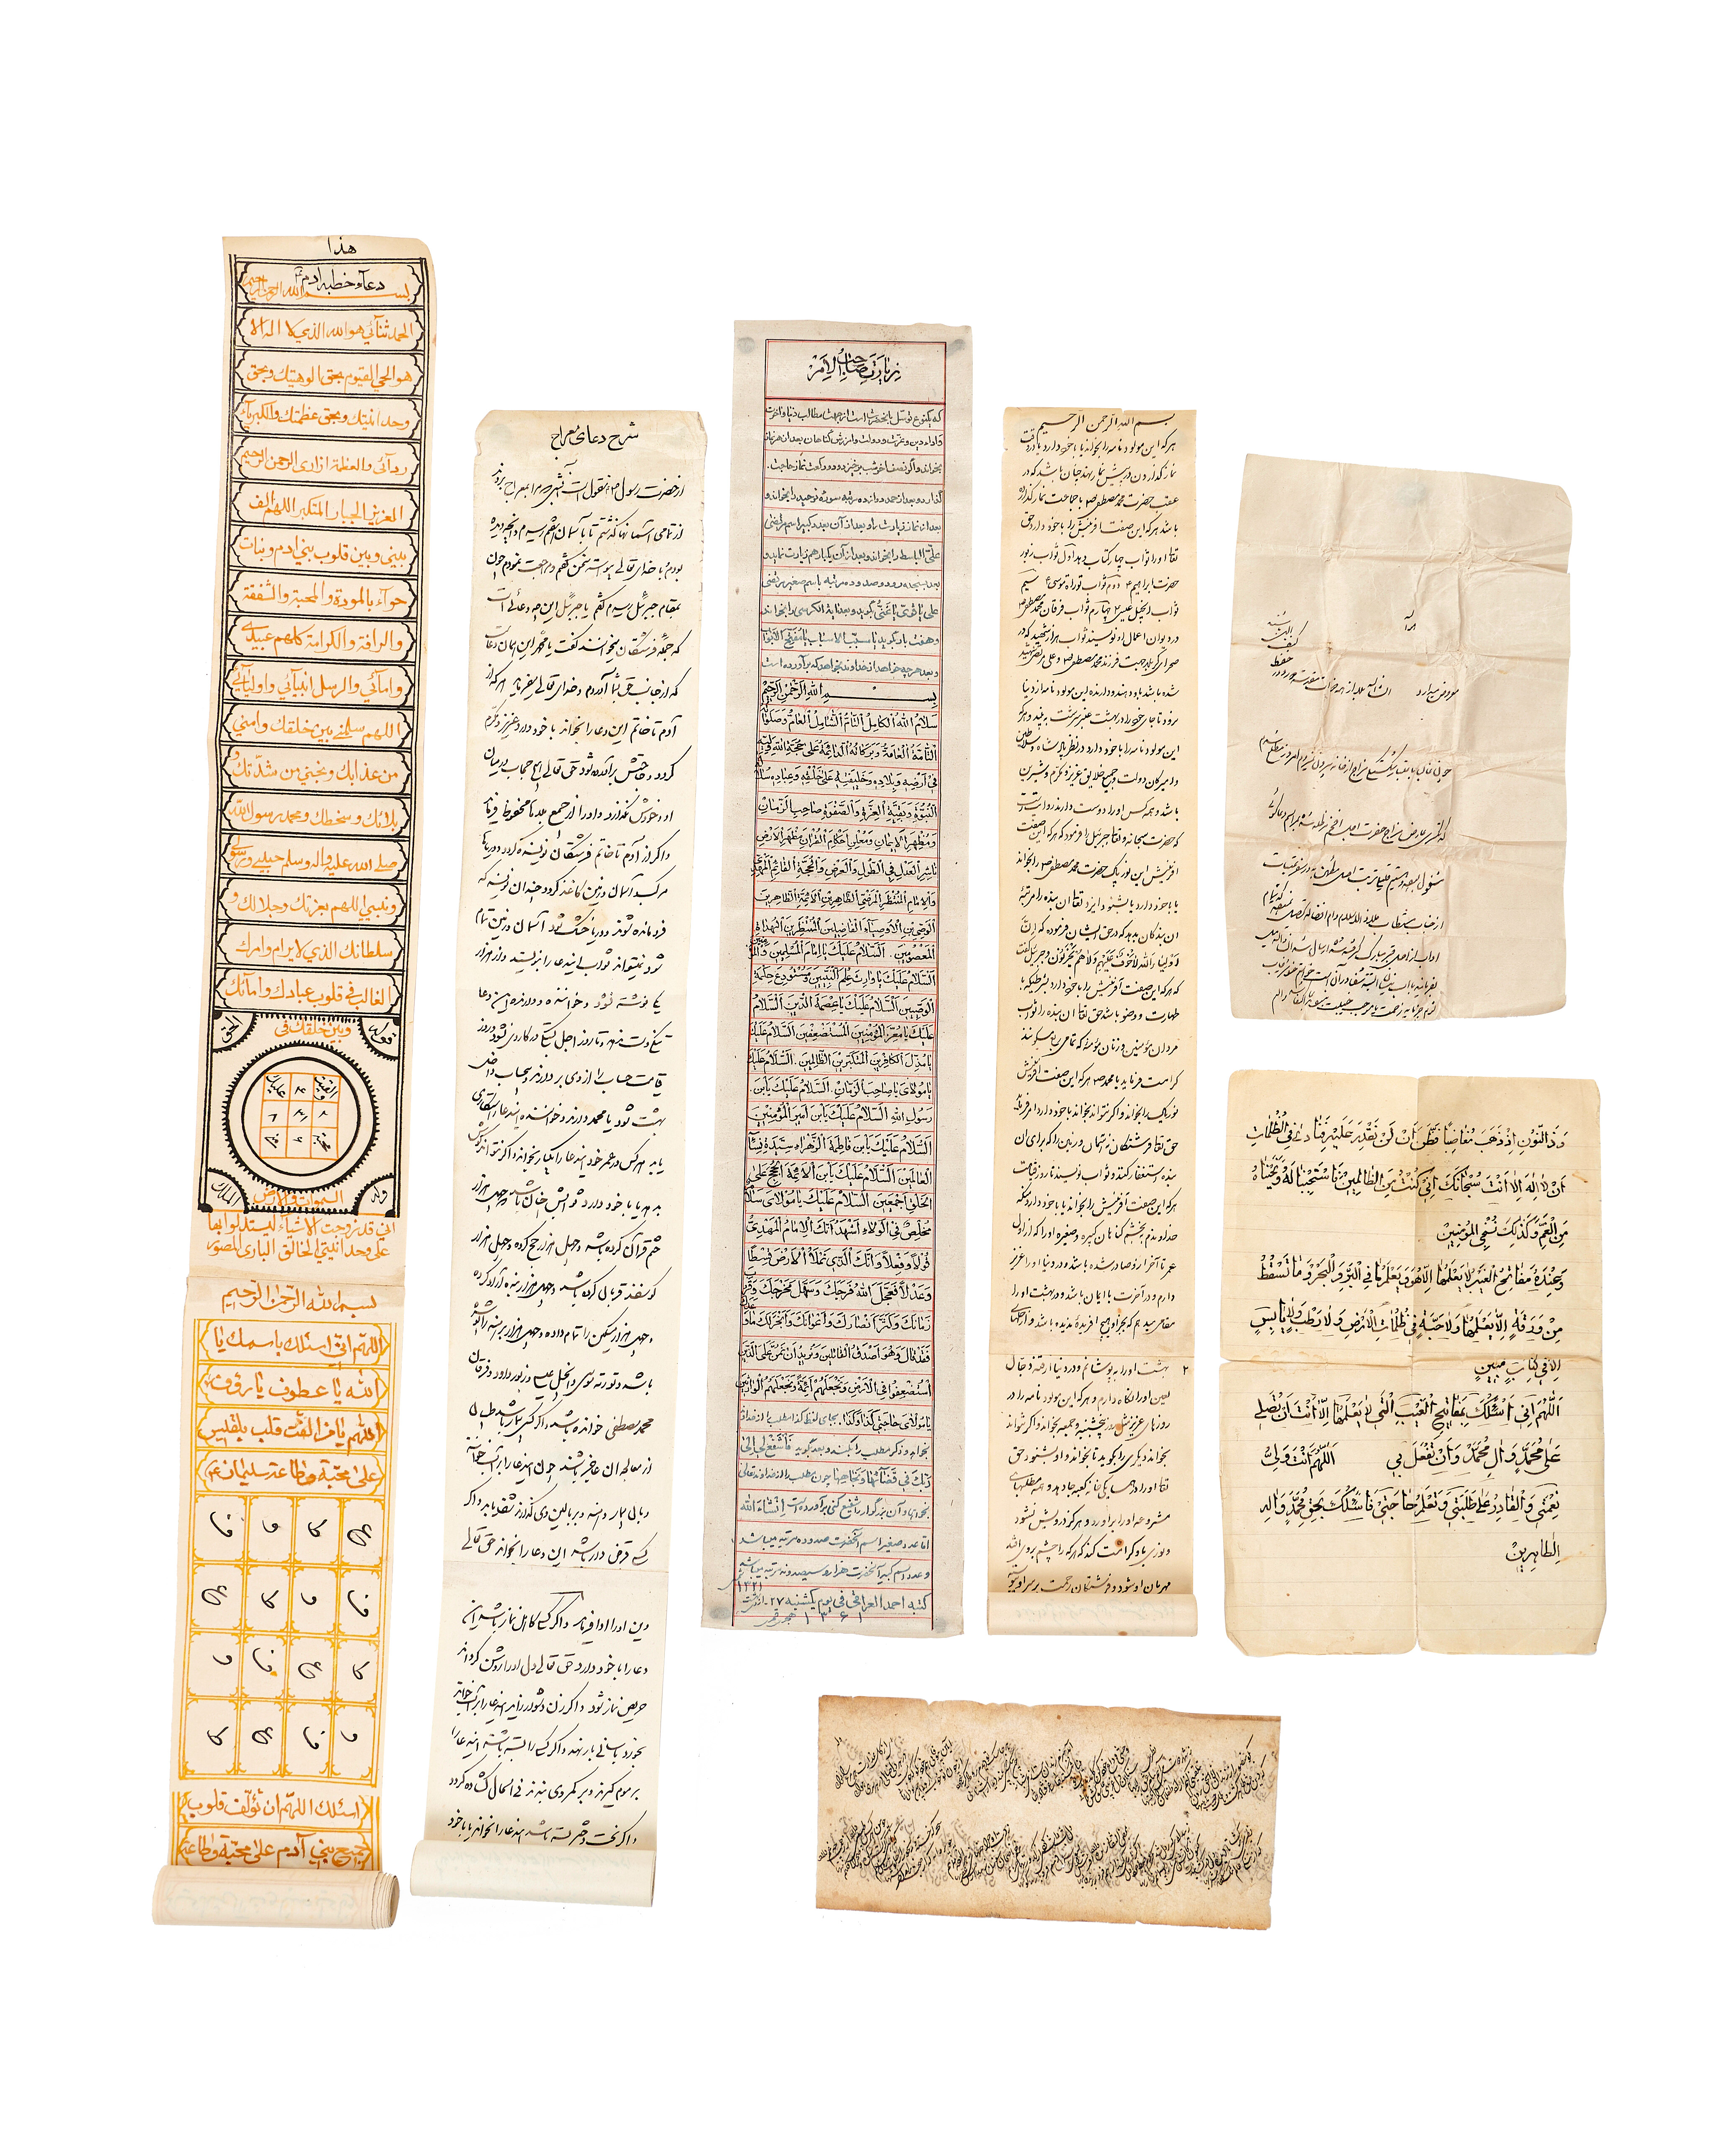 ASSORTMENT OF TALISMANIC SCROLLS AND WORKS ON PAPER, 19TH CENTURY - Image 5 of 6